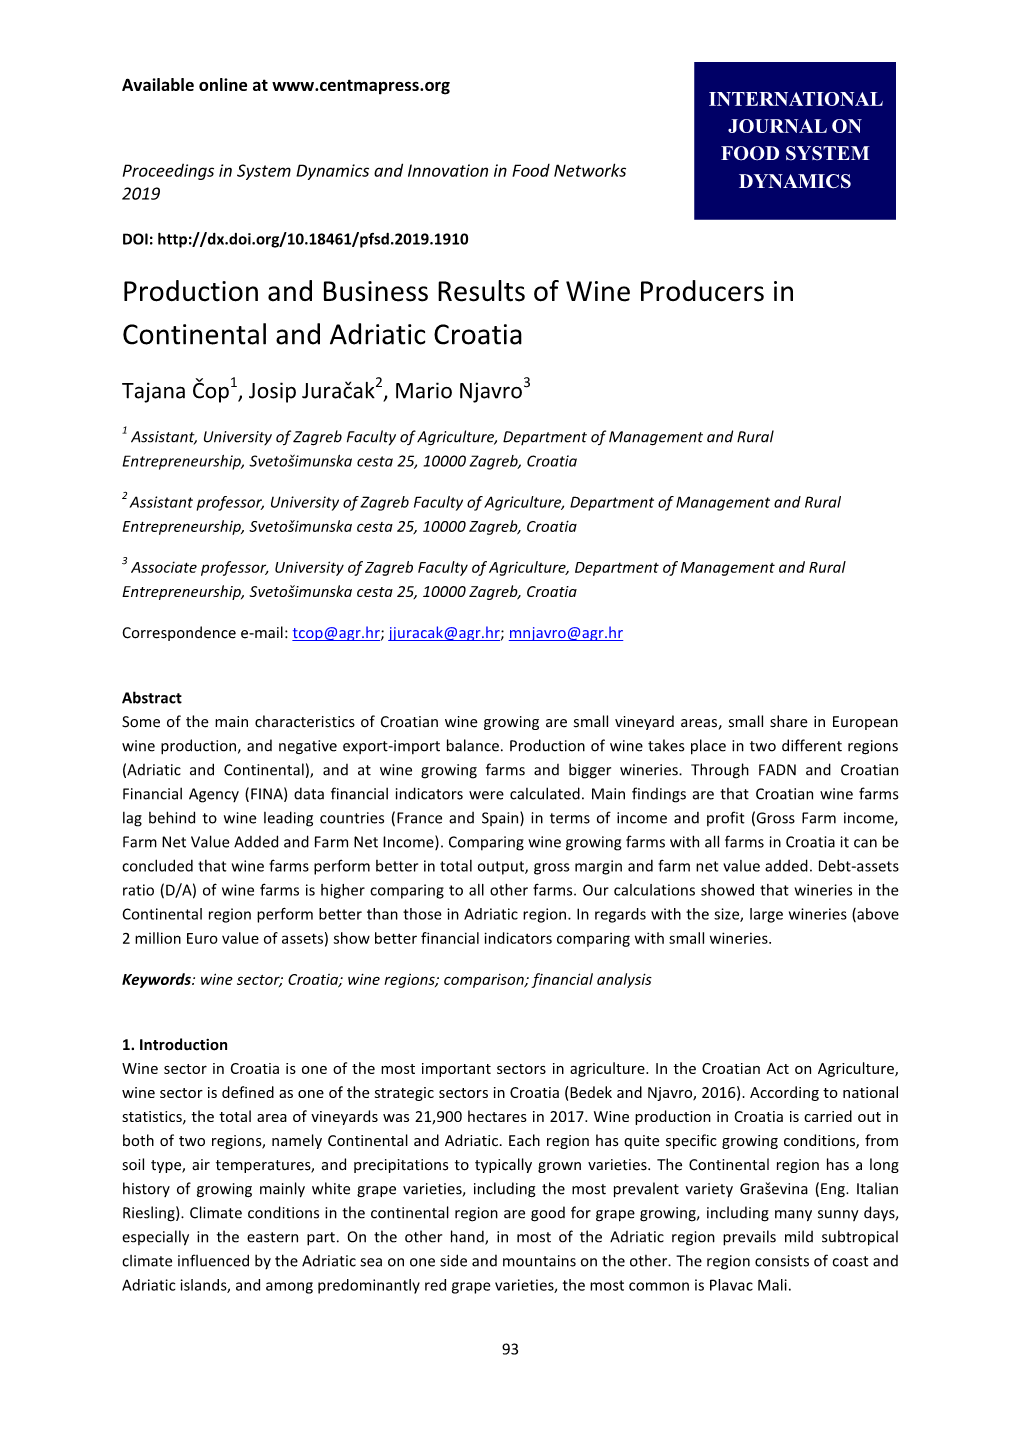 Production and Business Results of Wine Producers in Continental and Adriatic Croatia